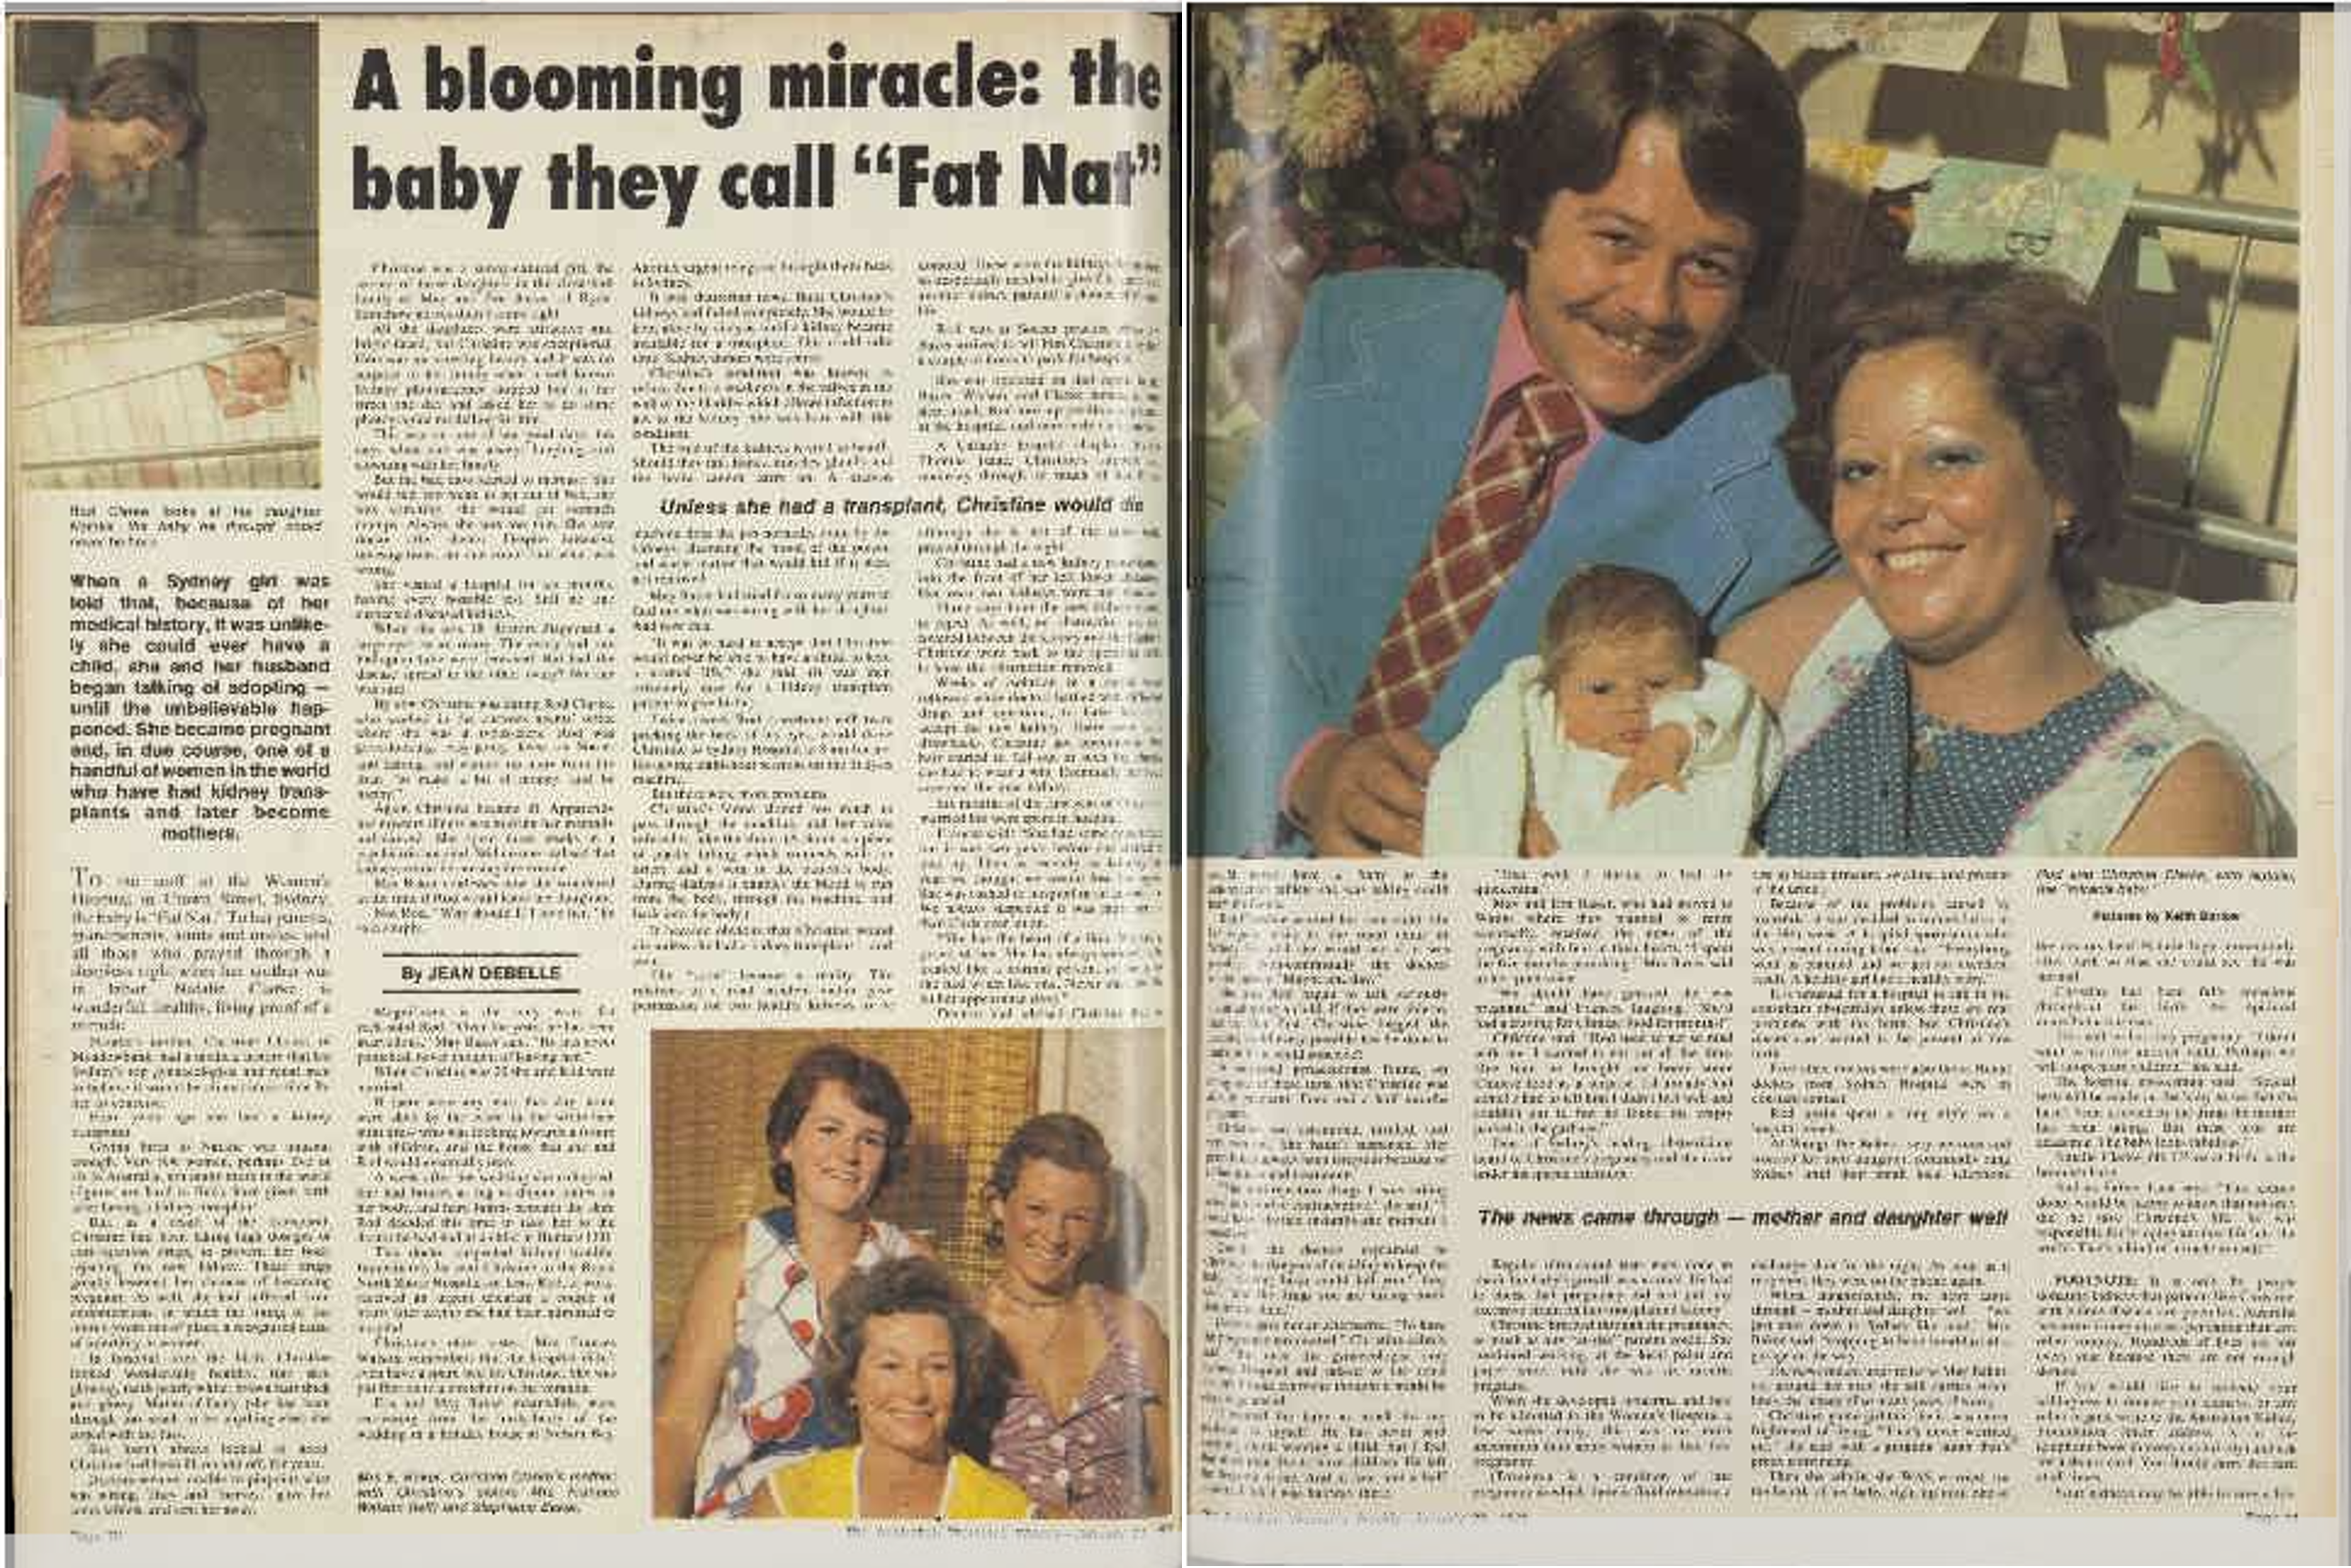 Image of article in the Australian Women's weekly with photos of the new parents and baby